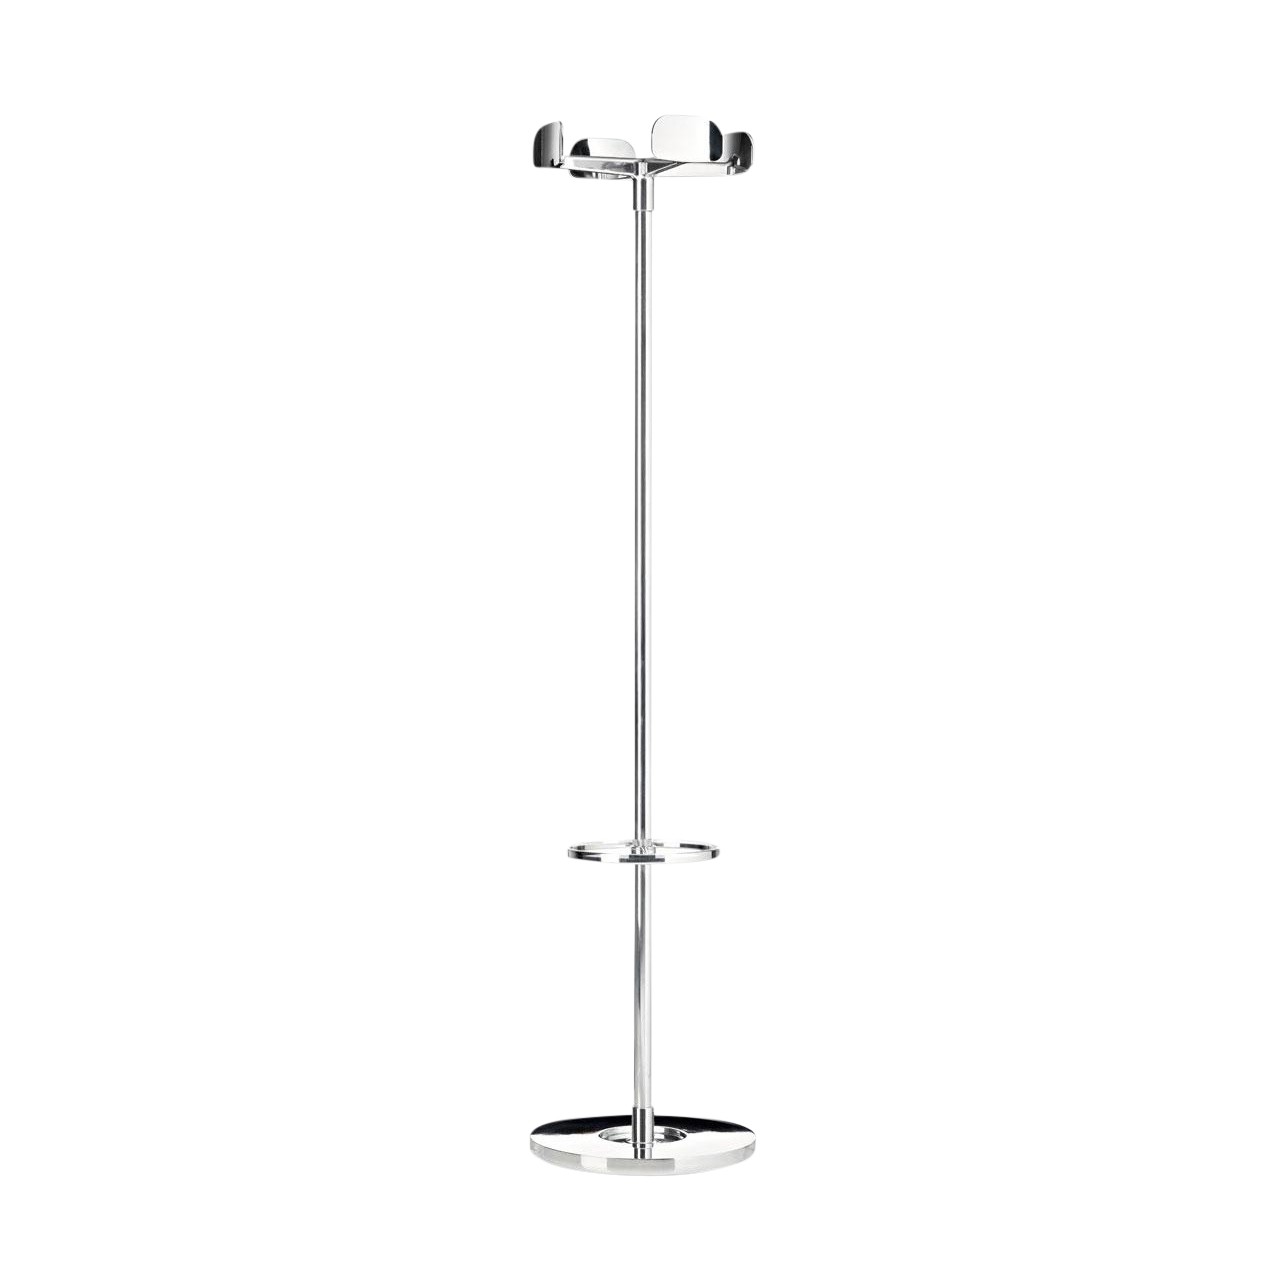 FOUR LEAVES coat stand with umbrella stand